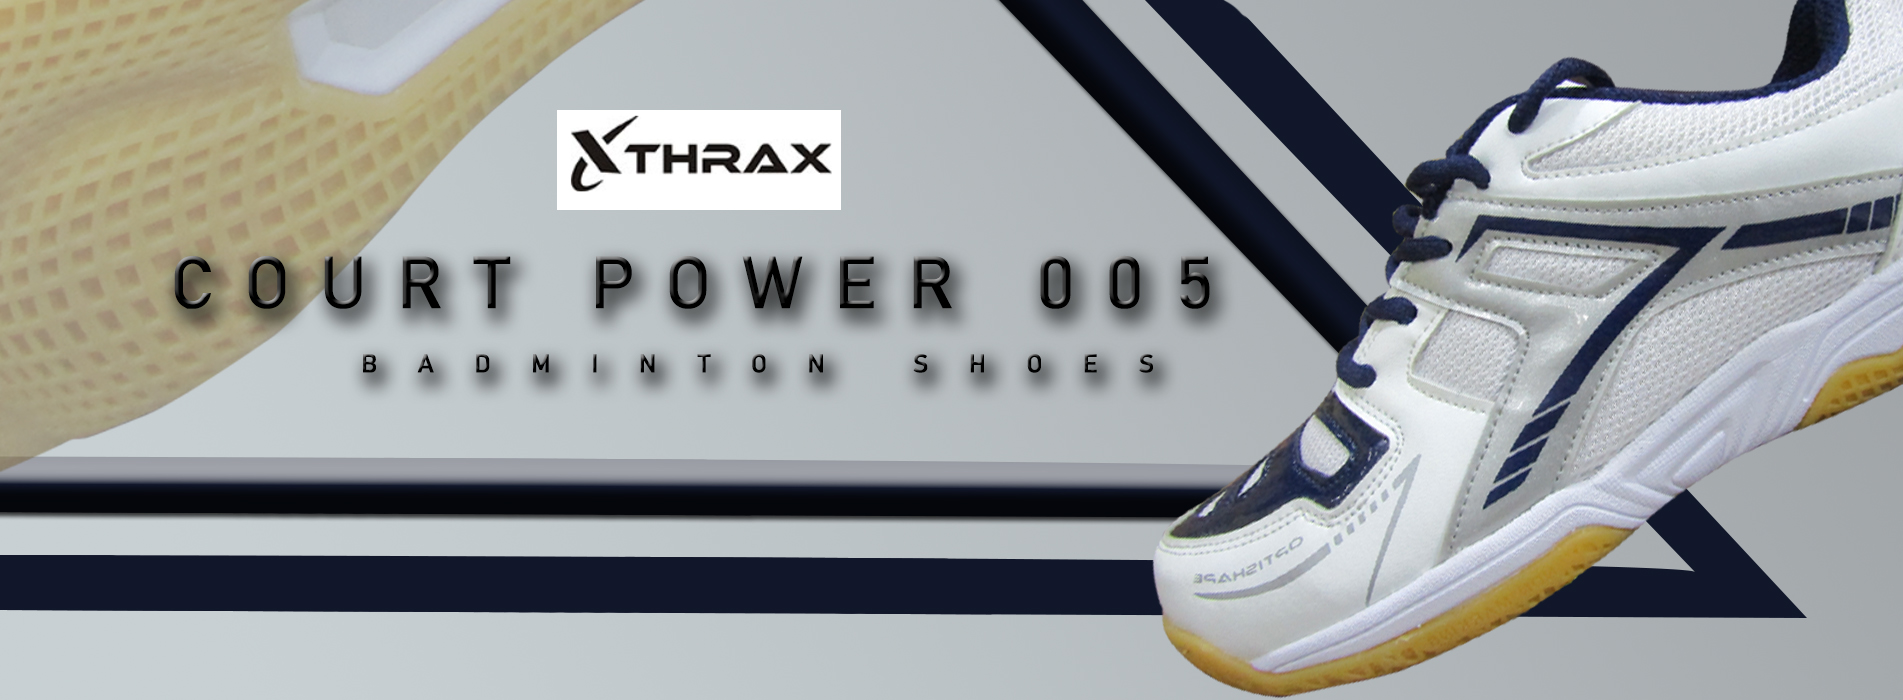 Thrax_Court_power_005_Shoes